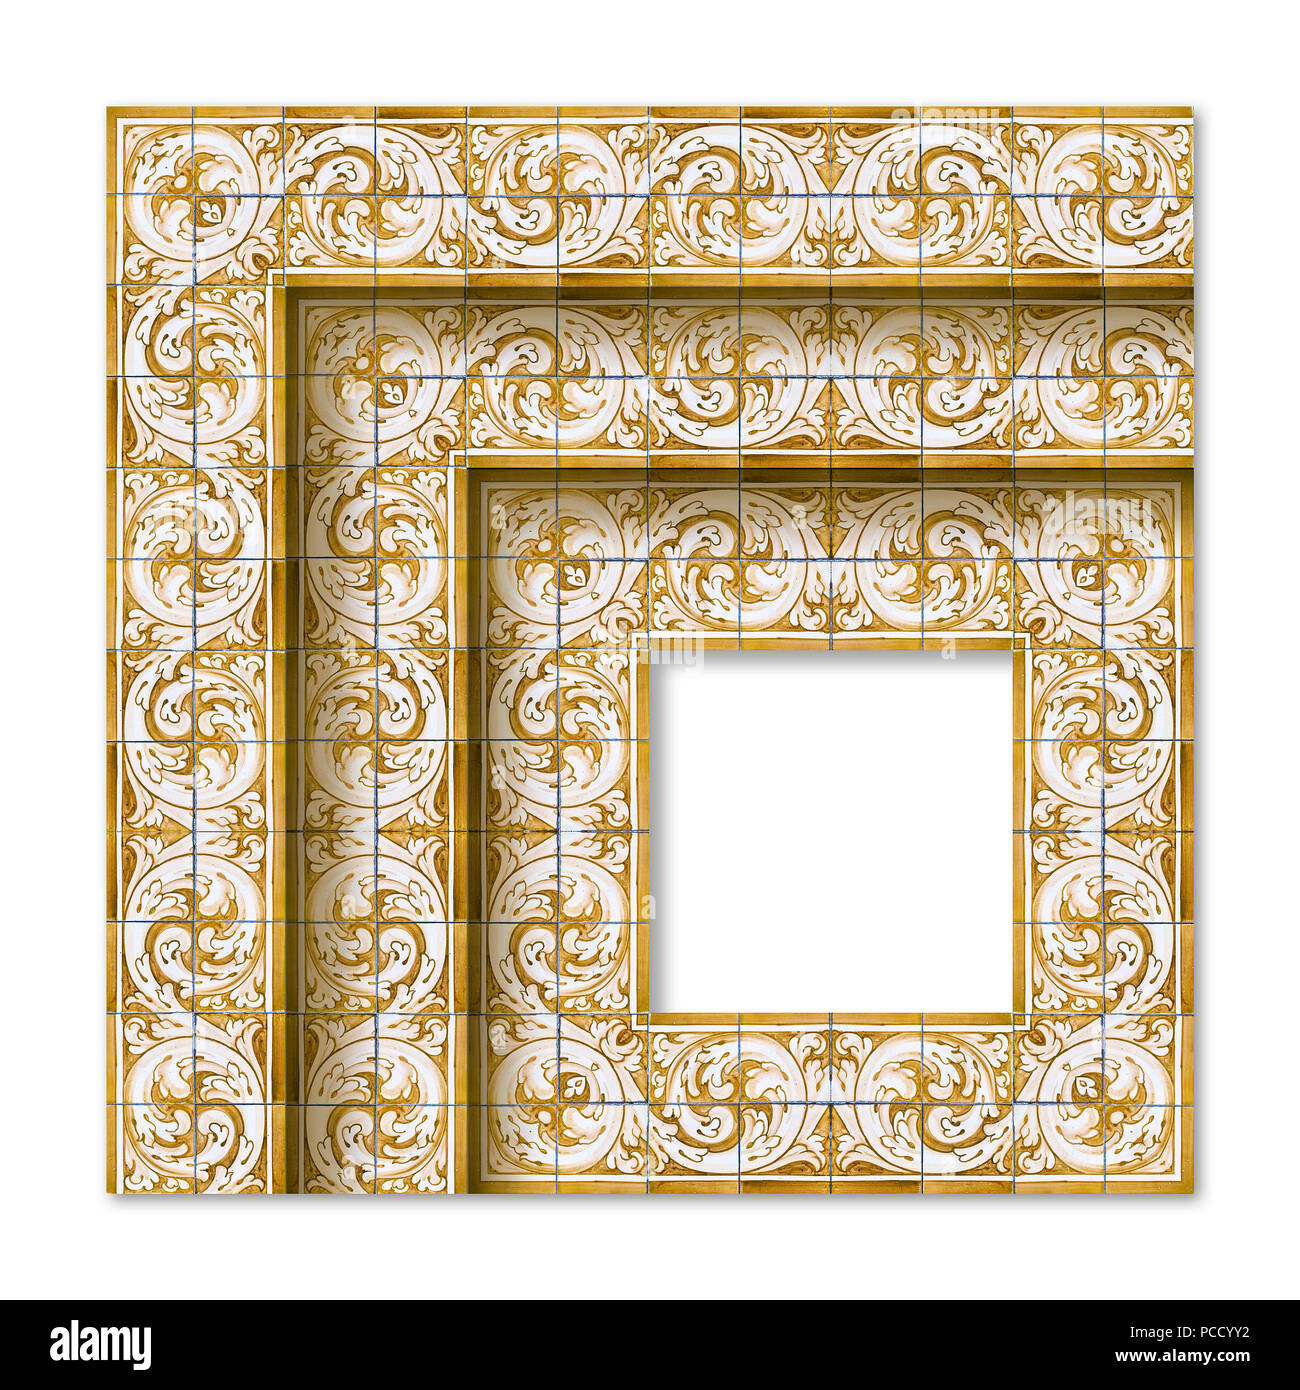 Frame design with typical portuguese decorations called 'azulejos' Stock Photo